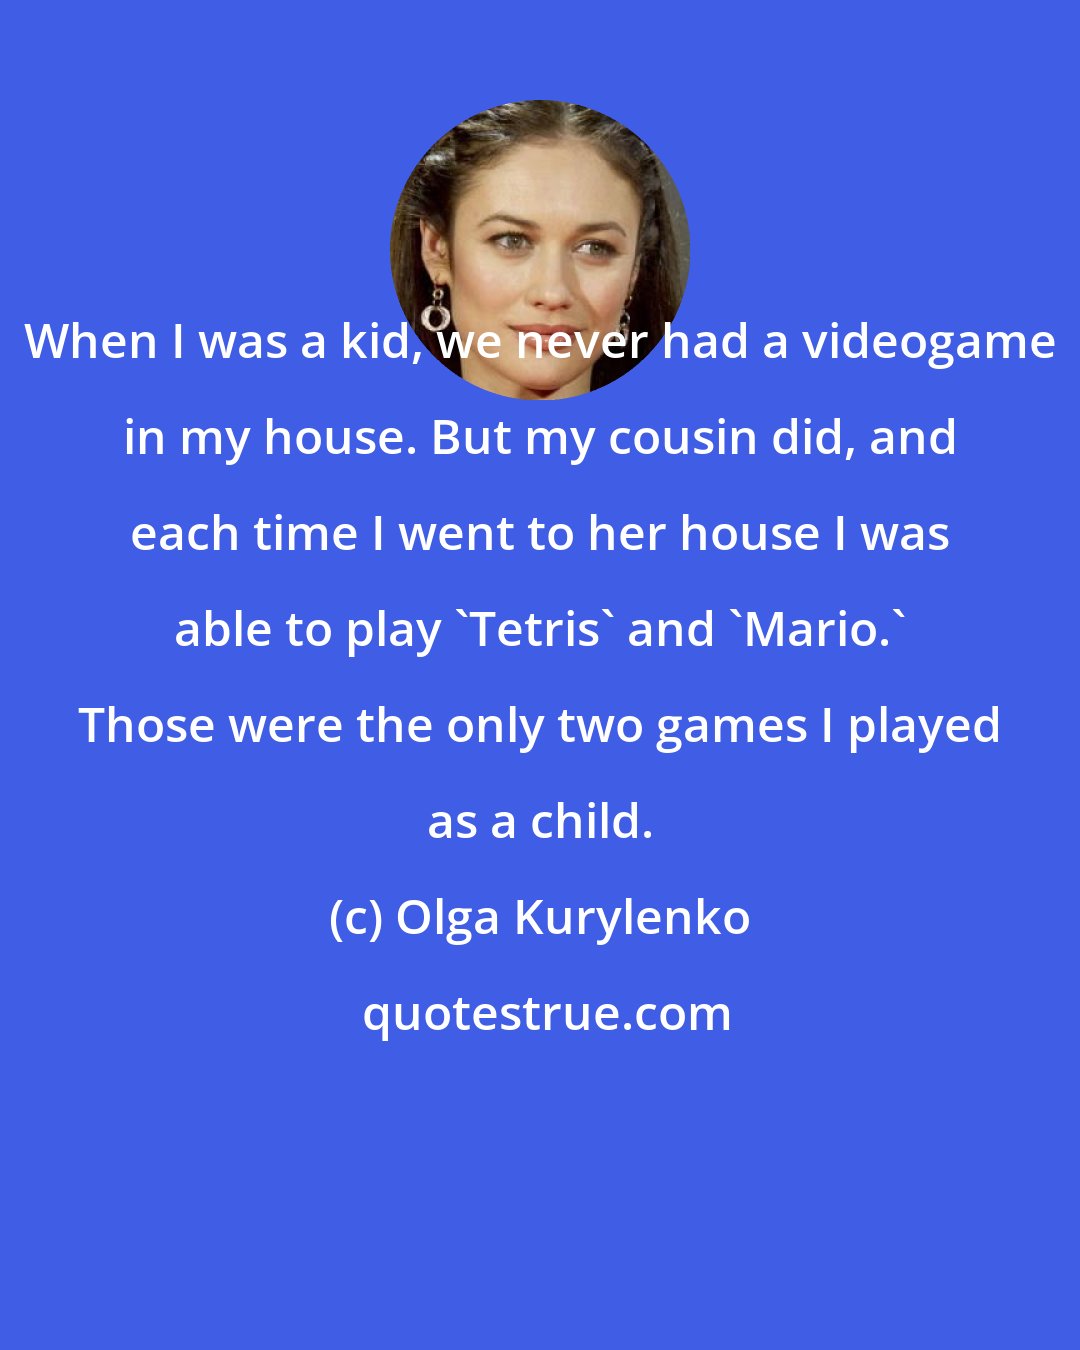 Olga Kurylenko: When I was a kid, we never had a videogame in my house. But my cousin did, and each time I went to her house I was able to play 'Tetris' and 'Mario.' Those were the only two games I played as a child.